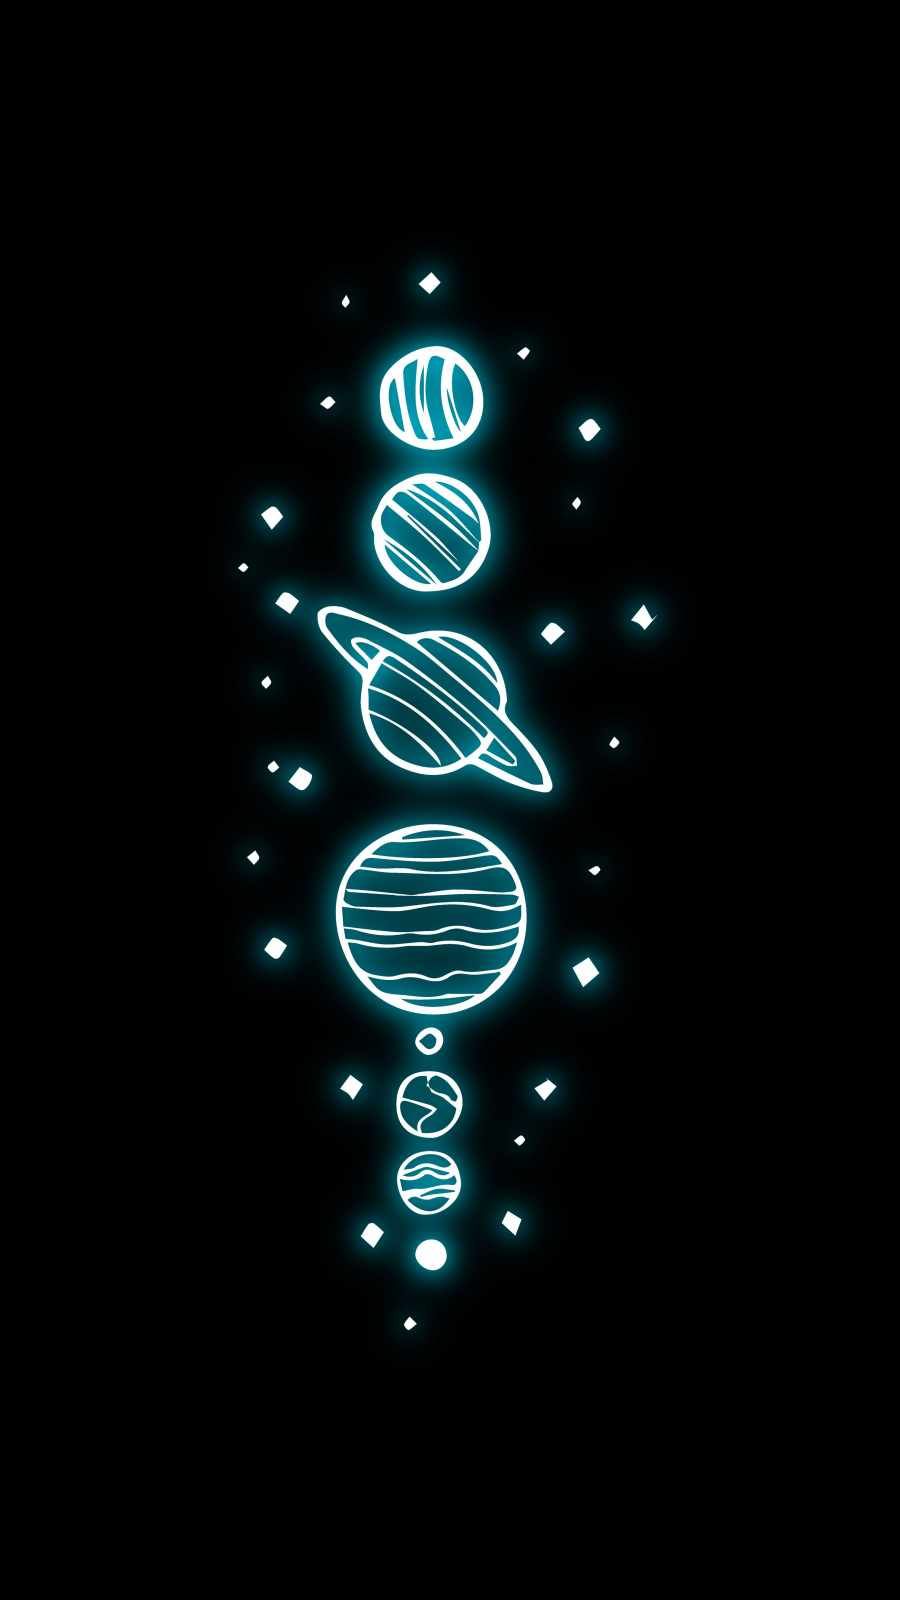 The solar system neon sign - Planet